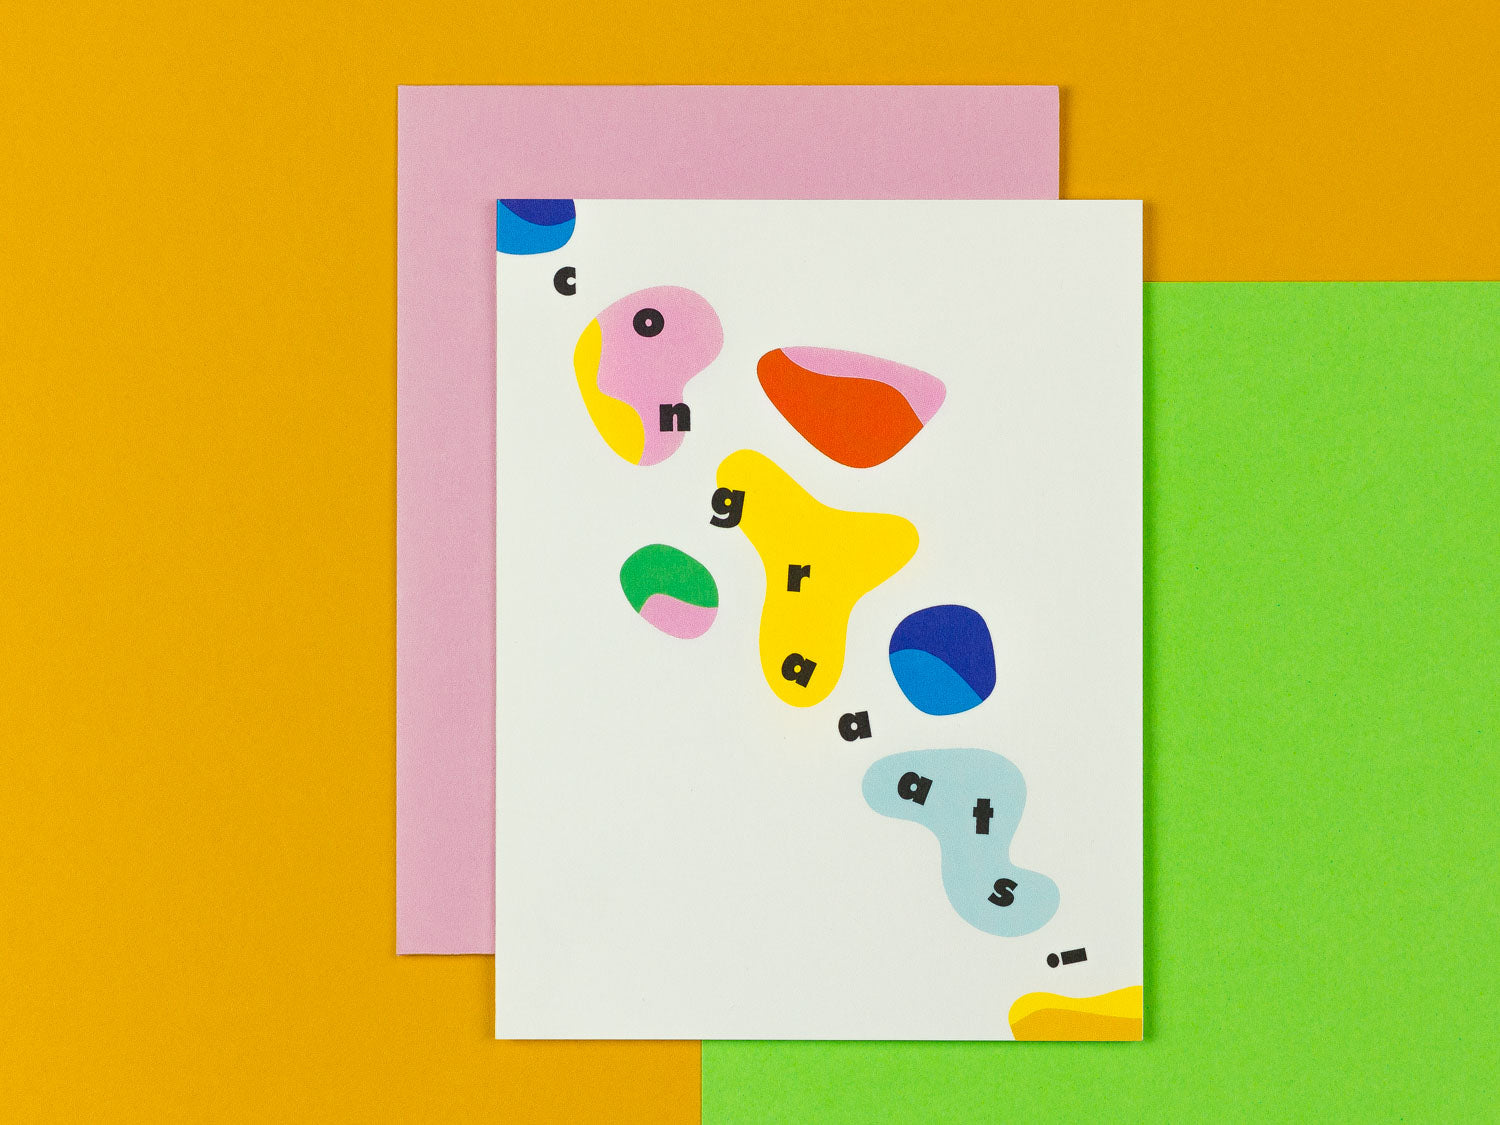 Congrats card with colorful abstract shapes by My Darlin' @mydarlin_bk